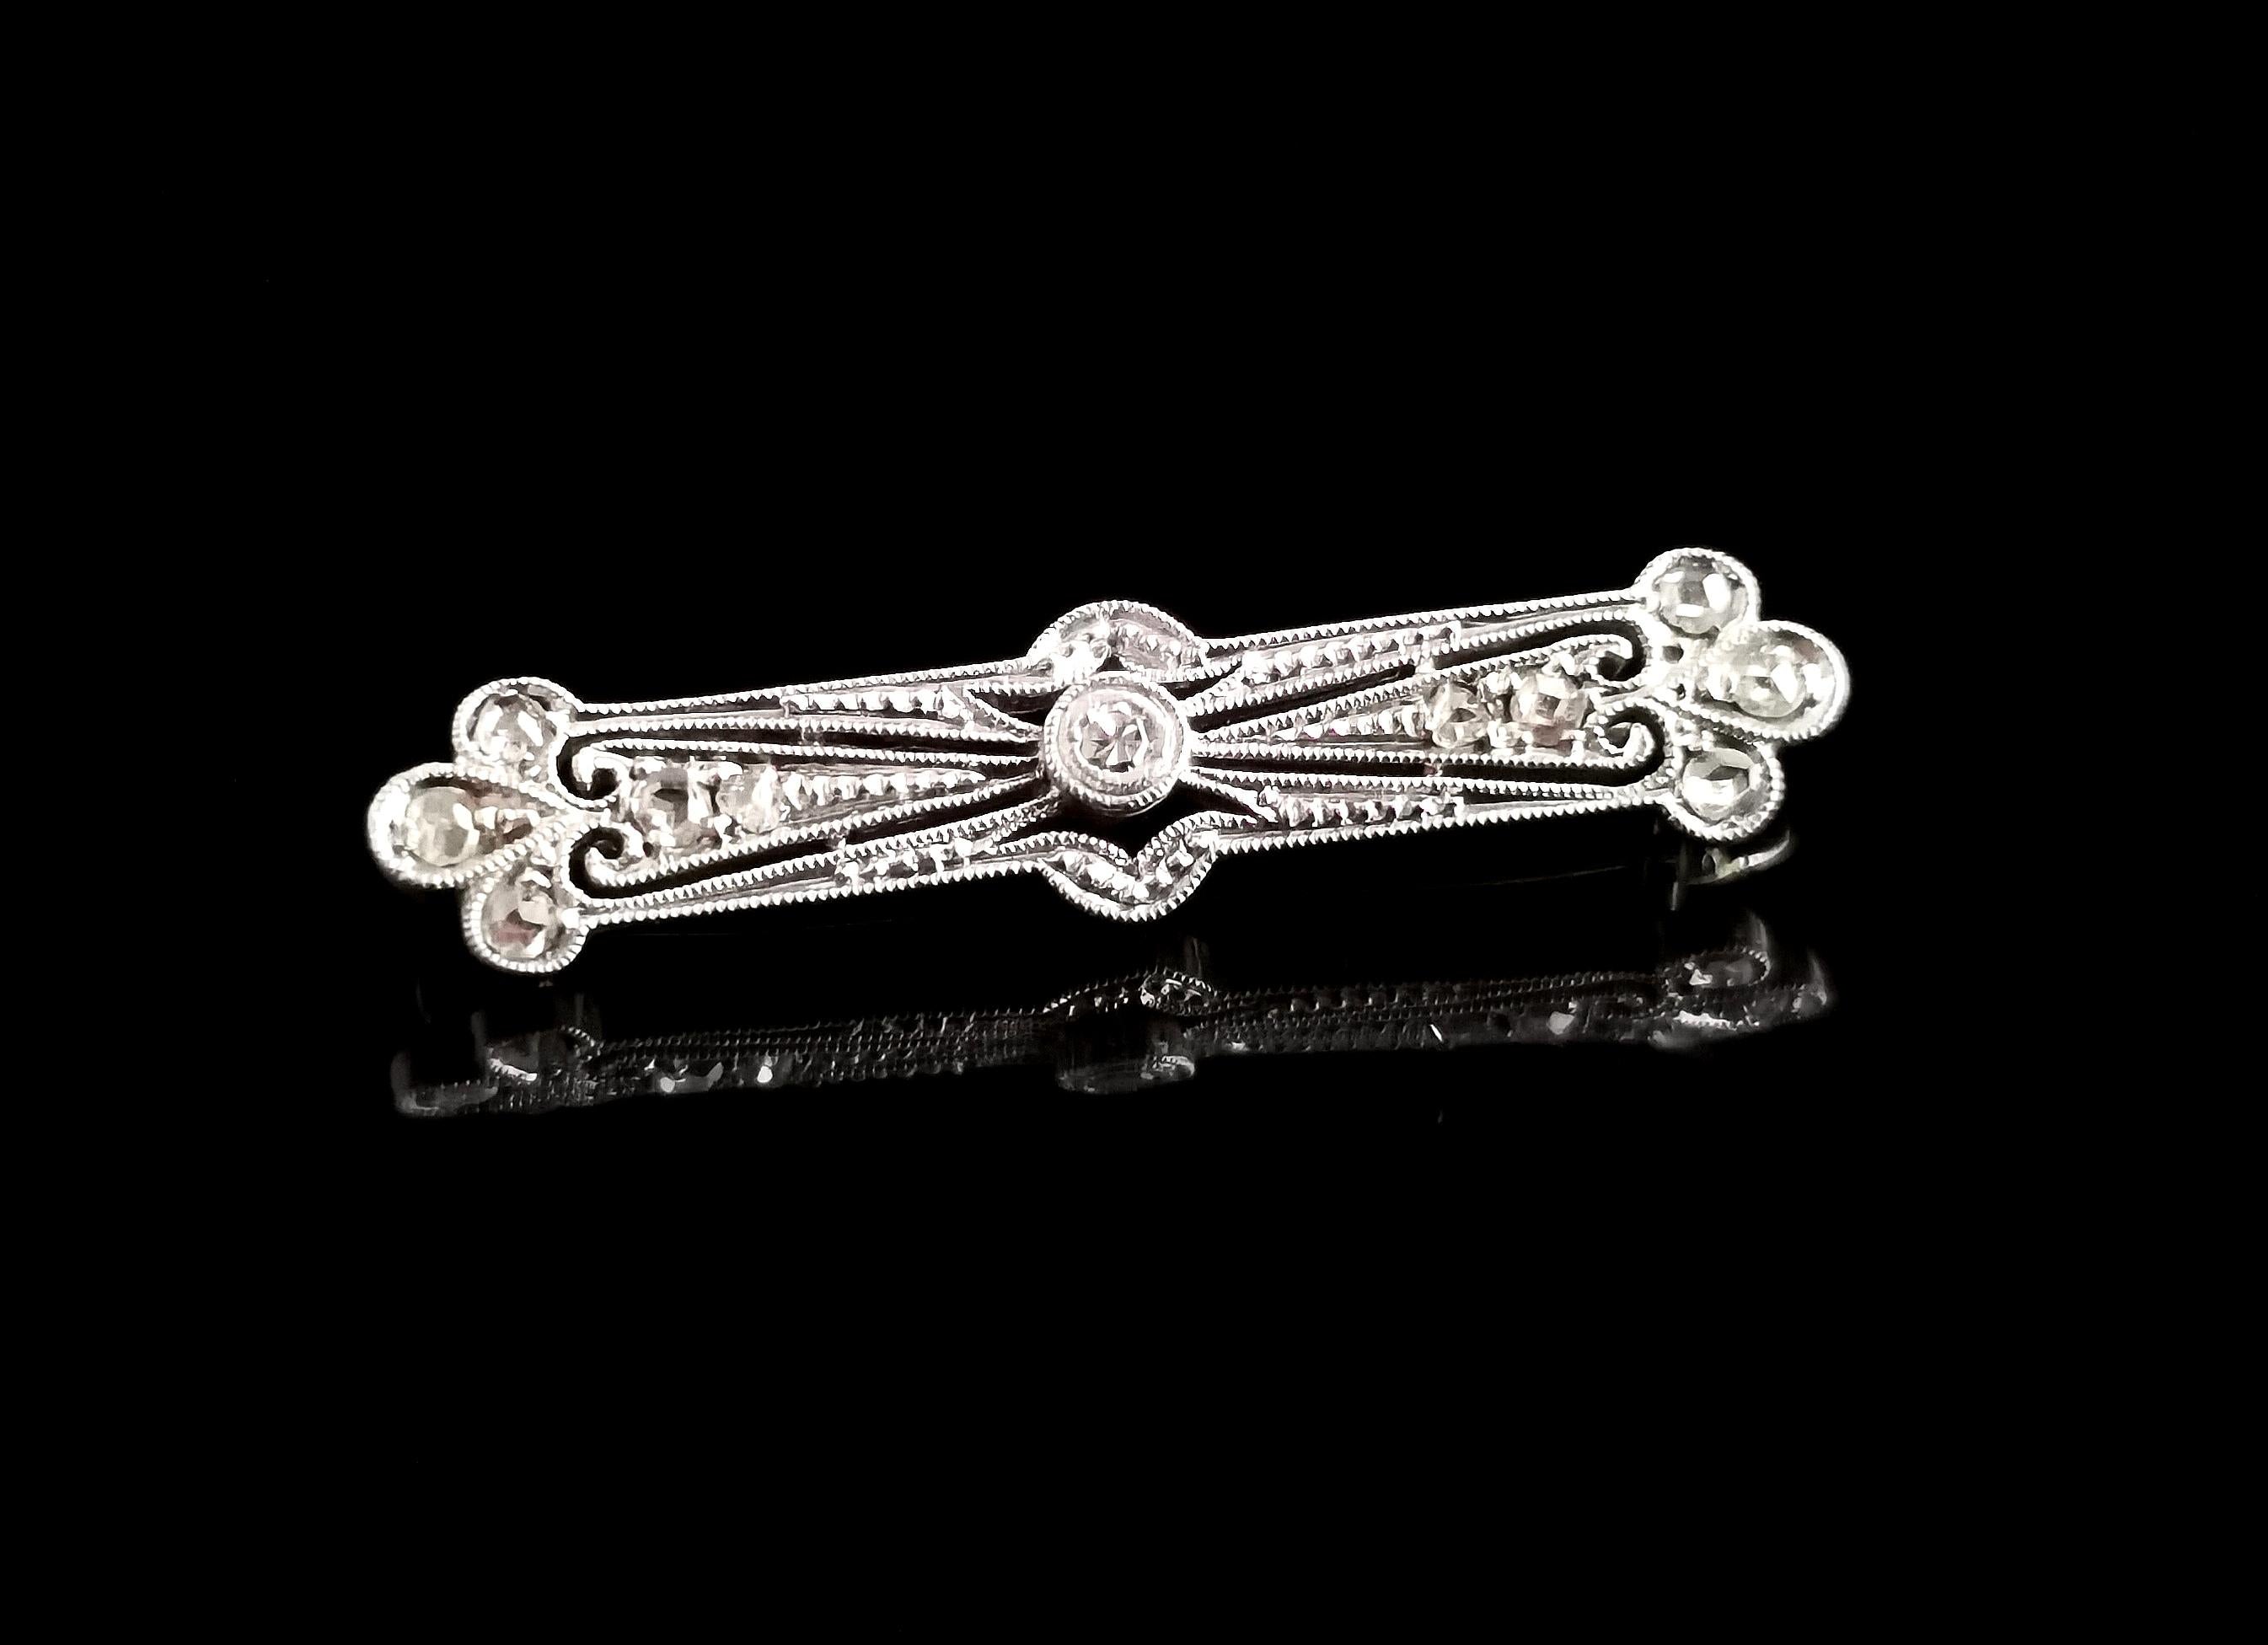 A magnificent vintage Art Deco platinum and diamond brooch.

A beautifully designed piece with the greatest attention to detail, well crafted in the Art Deco manner with openwork and scrolling features, it is a bar type brooch with trefoil shaped